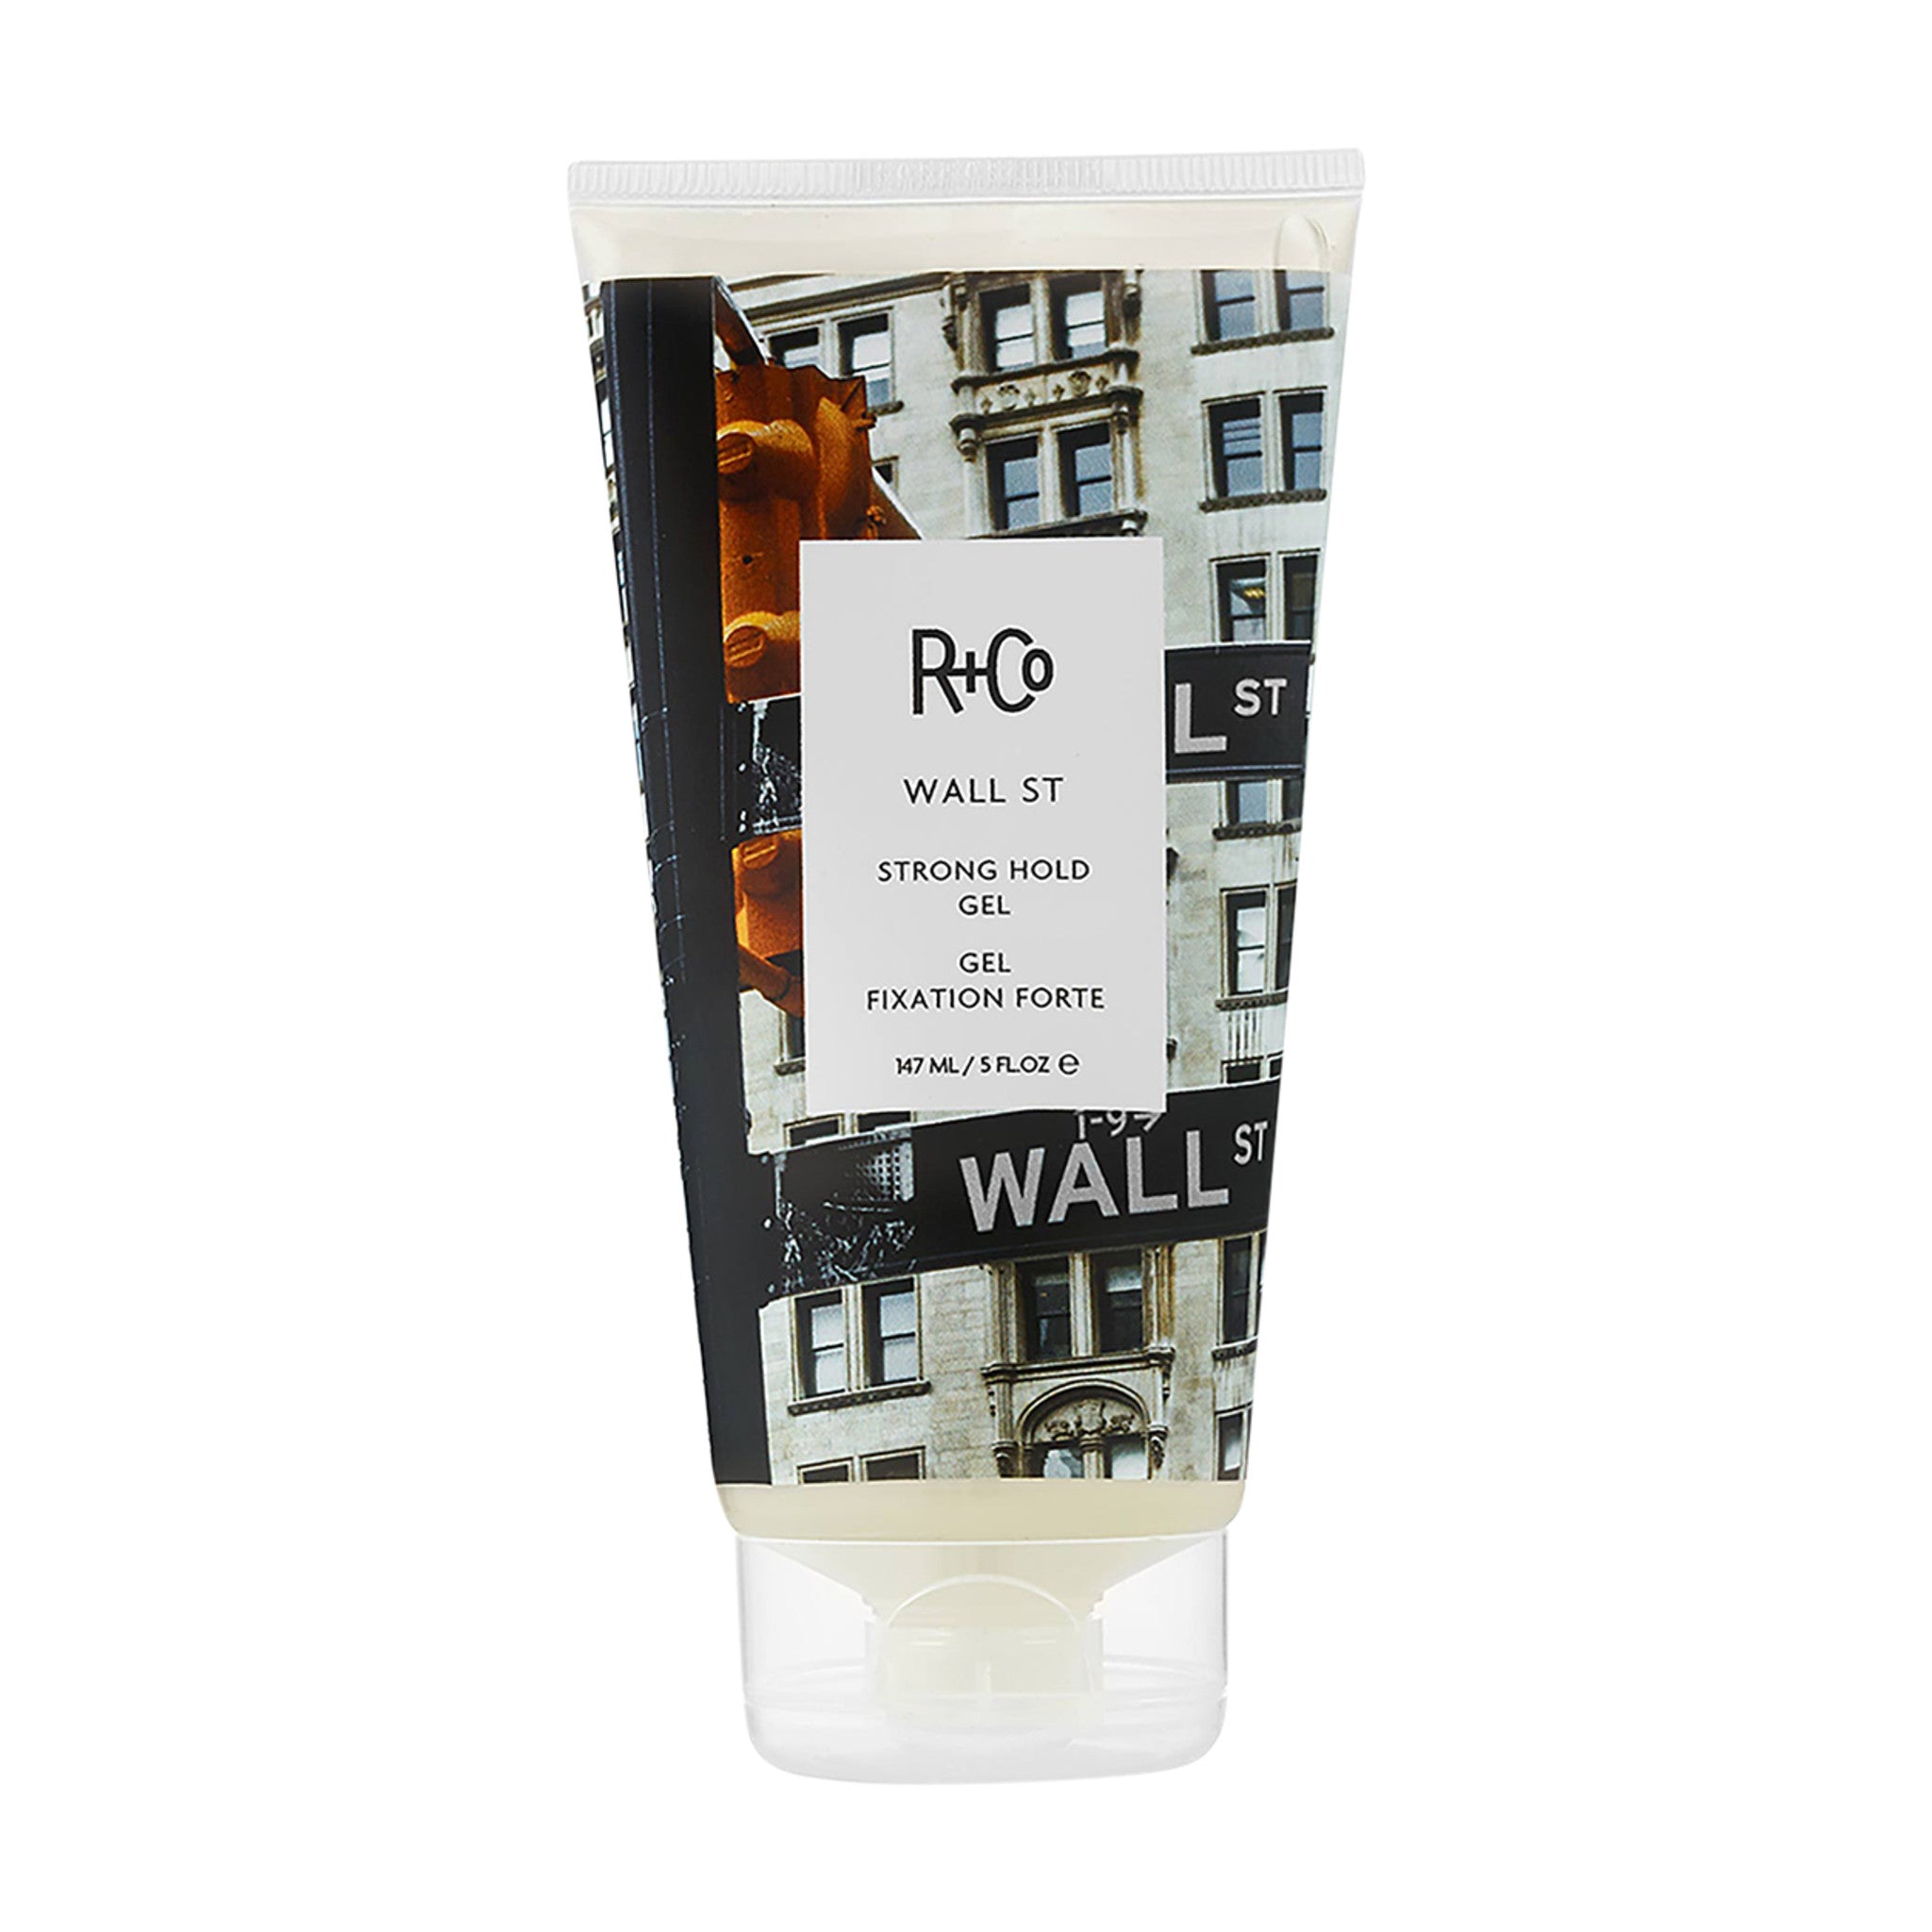 R+Co Wall St Strong Hold Gel main image.